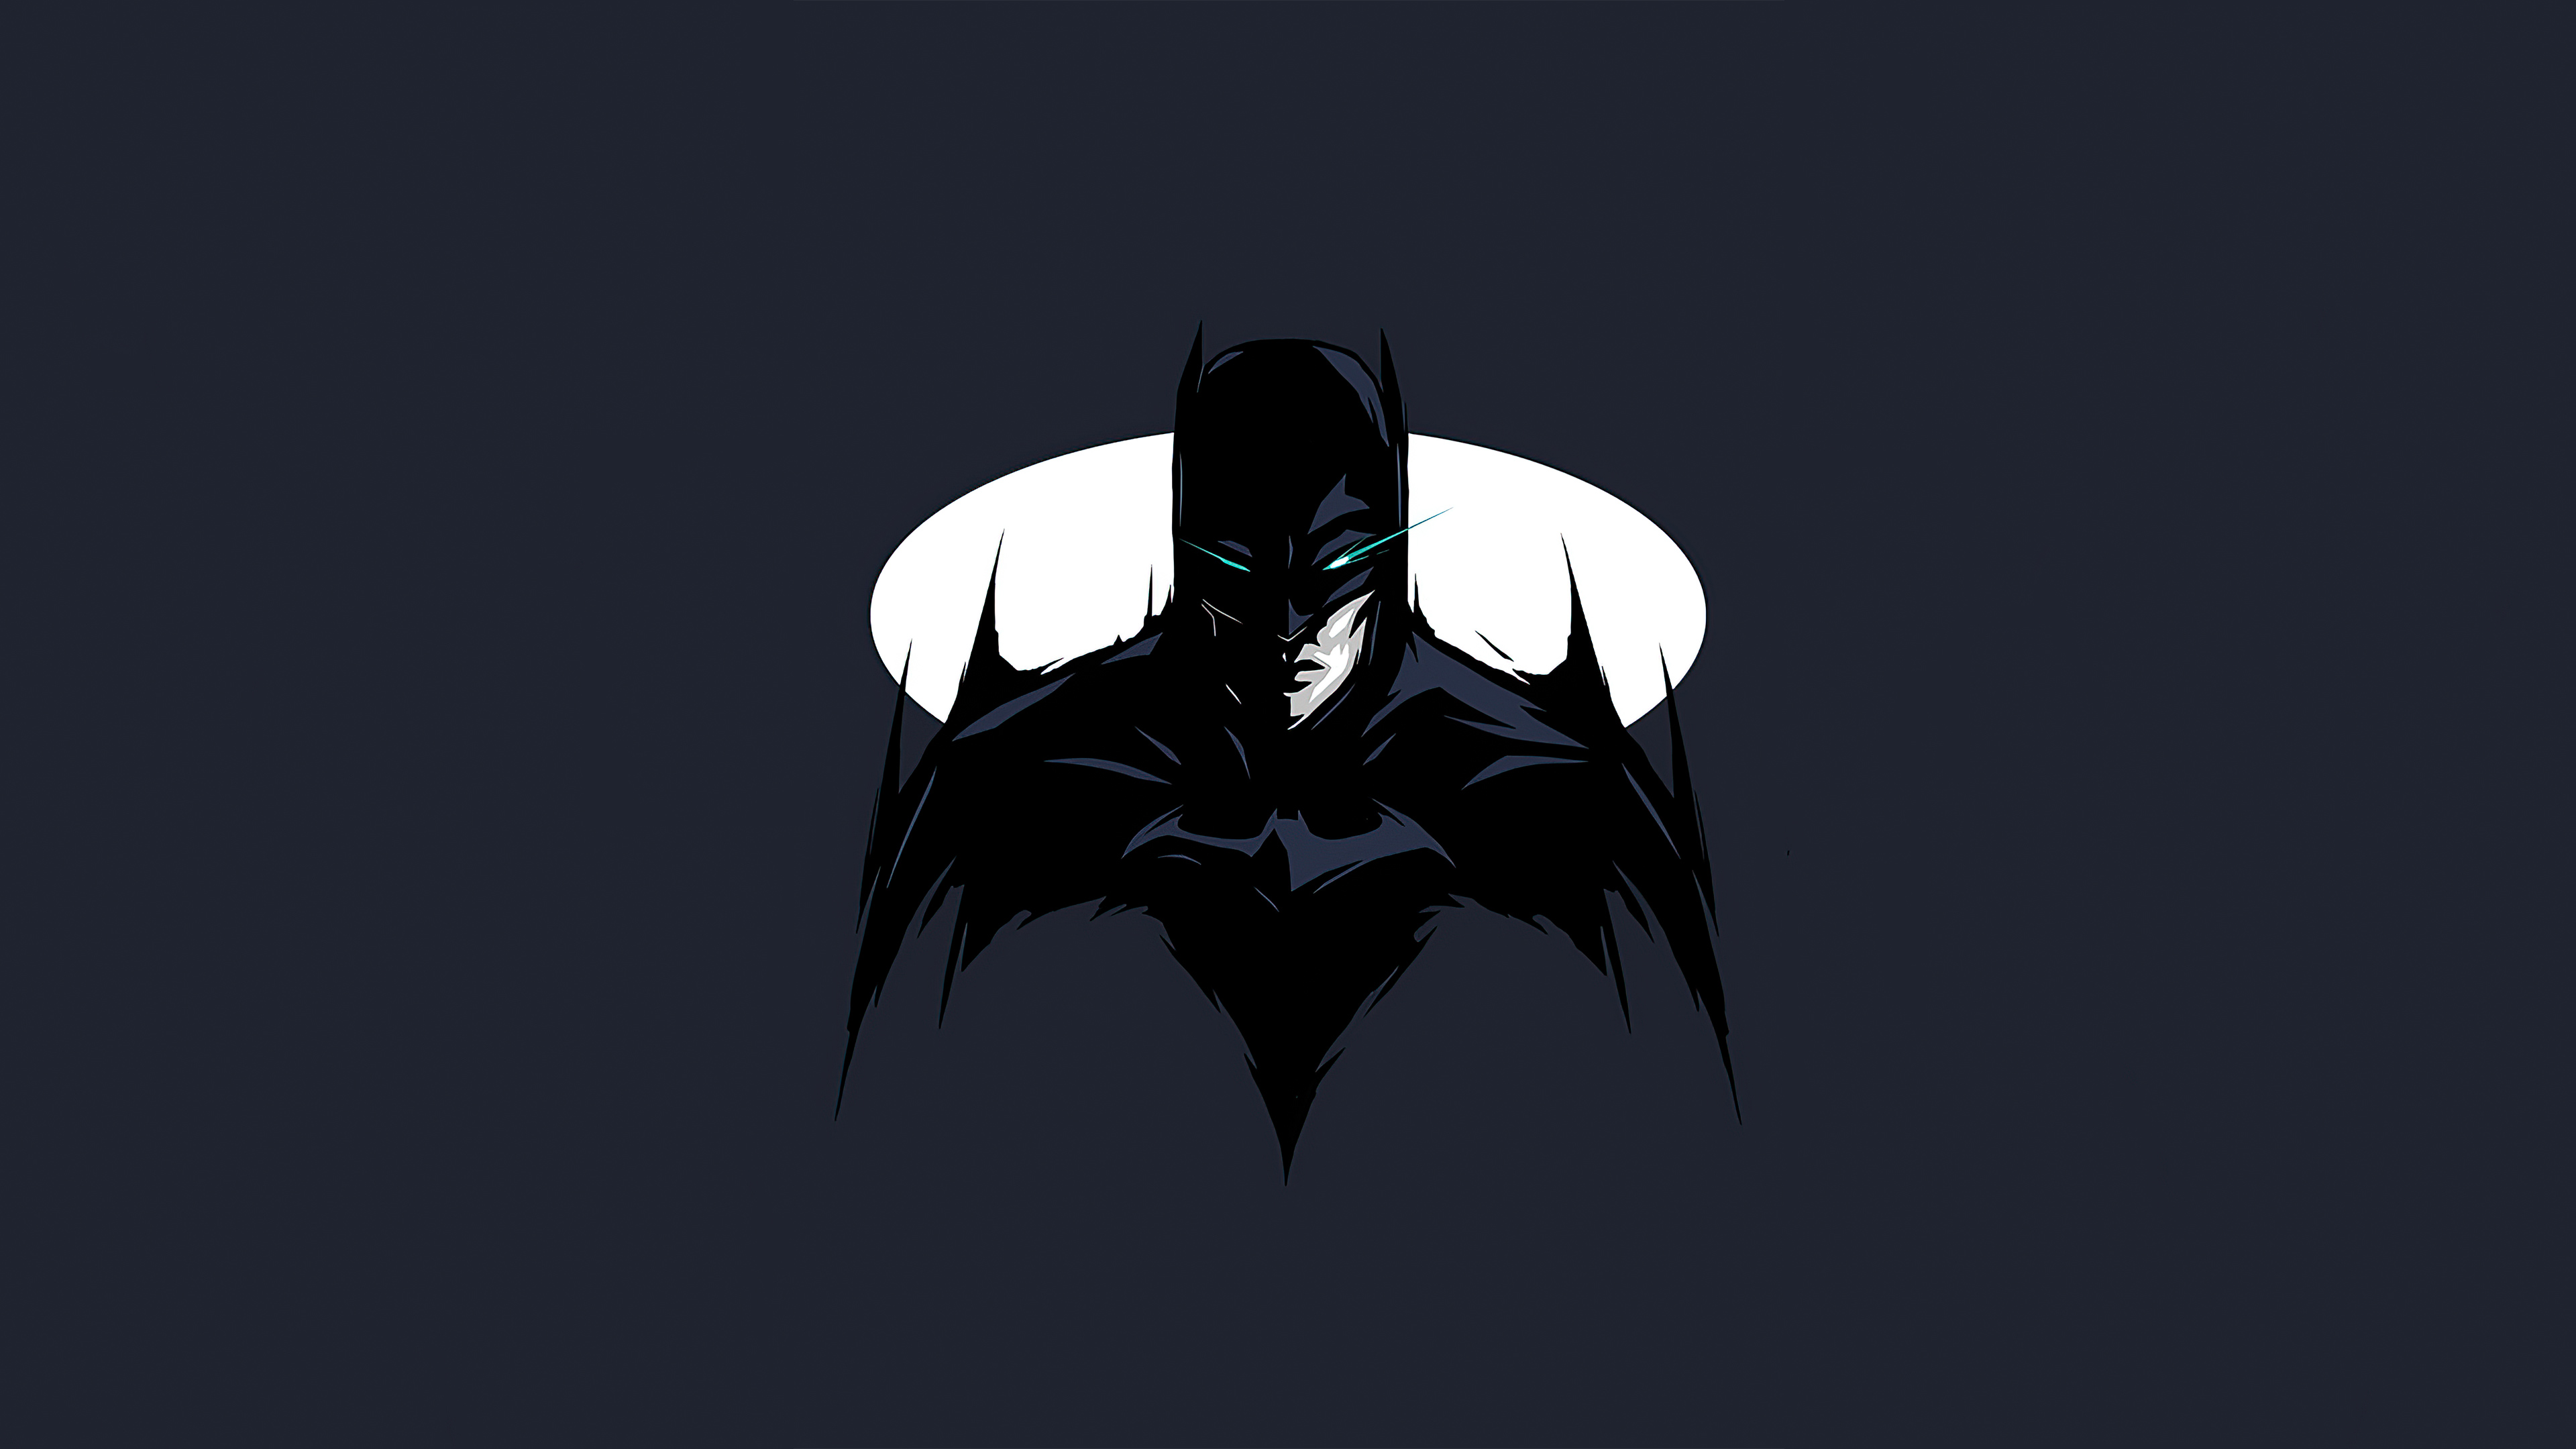 X batman knight k minimalism iphone iphone s iphone hd k wallpapers images backgrounds photos and pictures